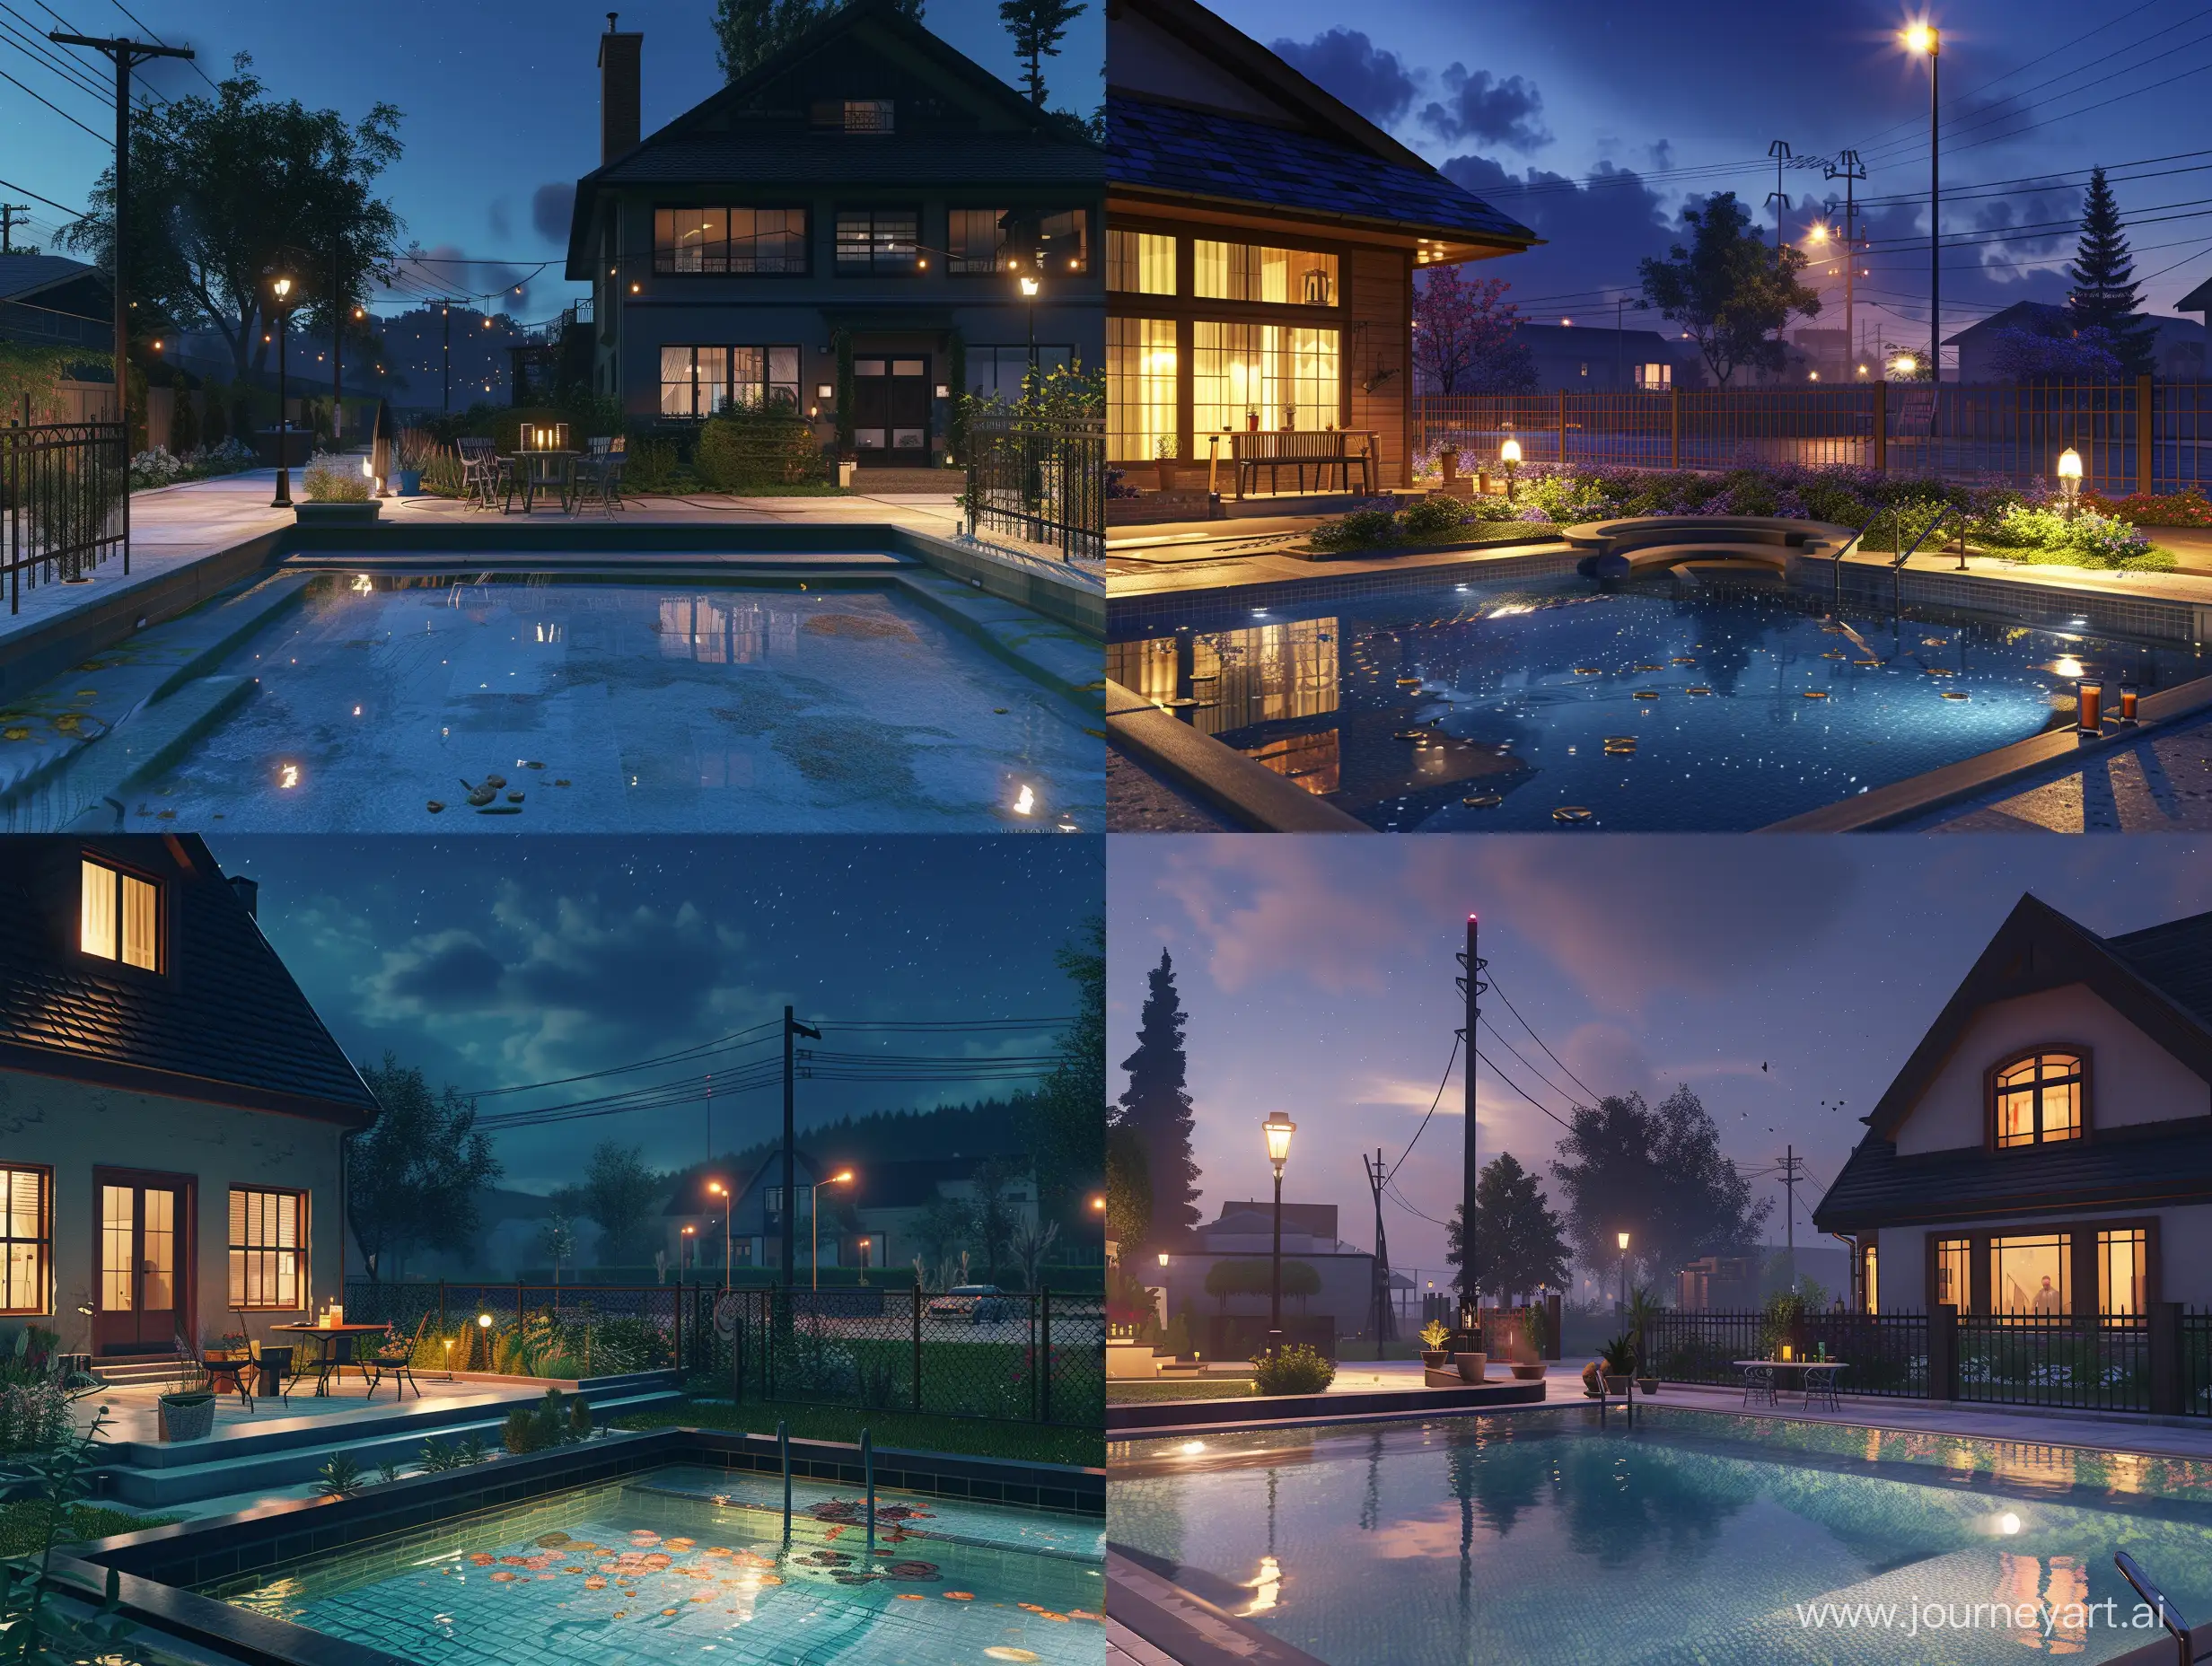 Beautiful-American-Style-Large-House-at-Night-with-Swimming-Pool-and-Gardens